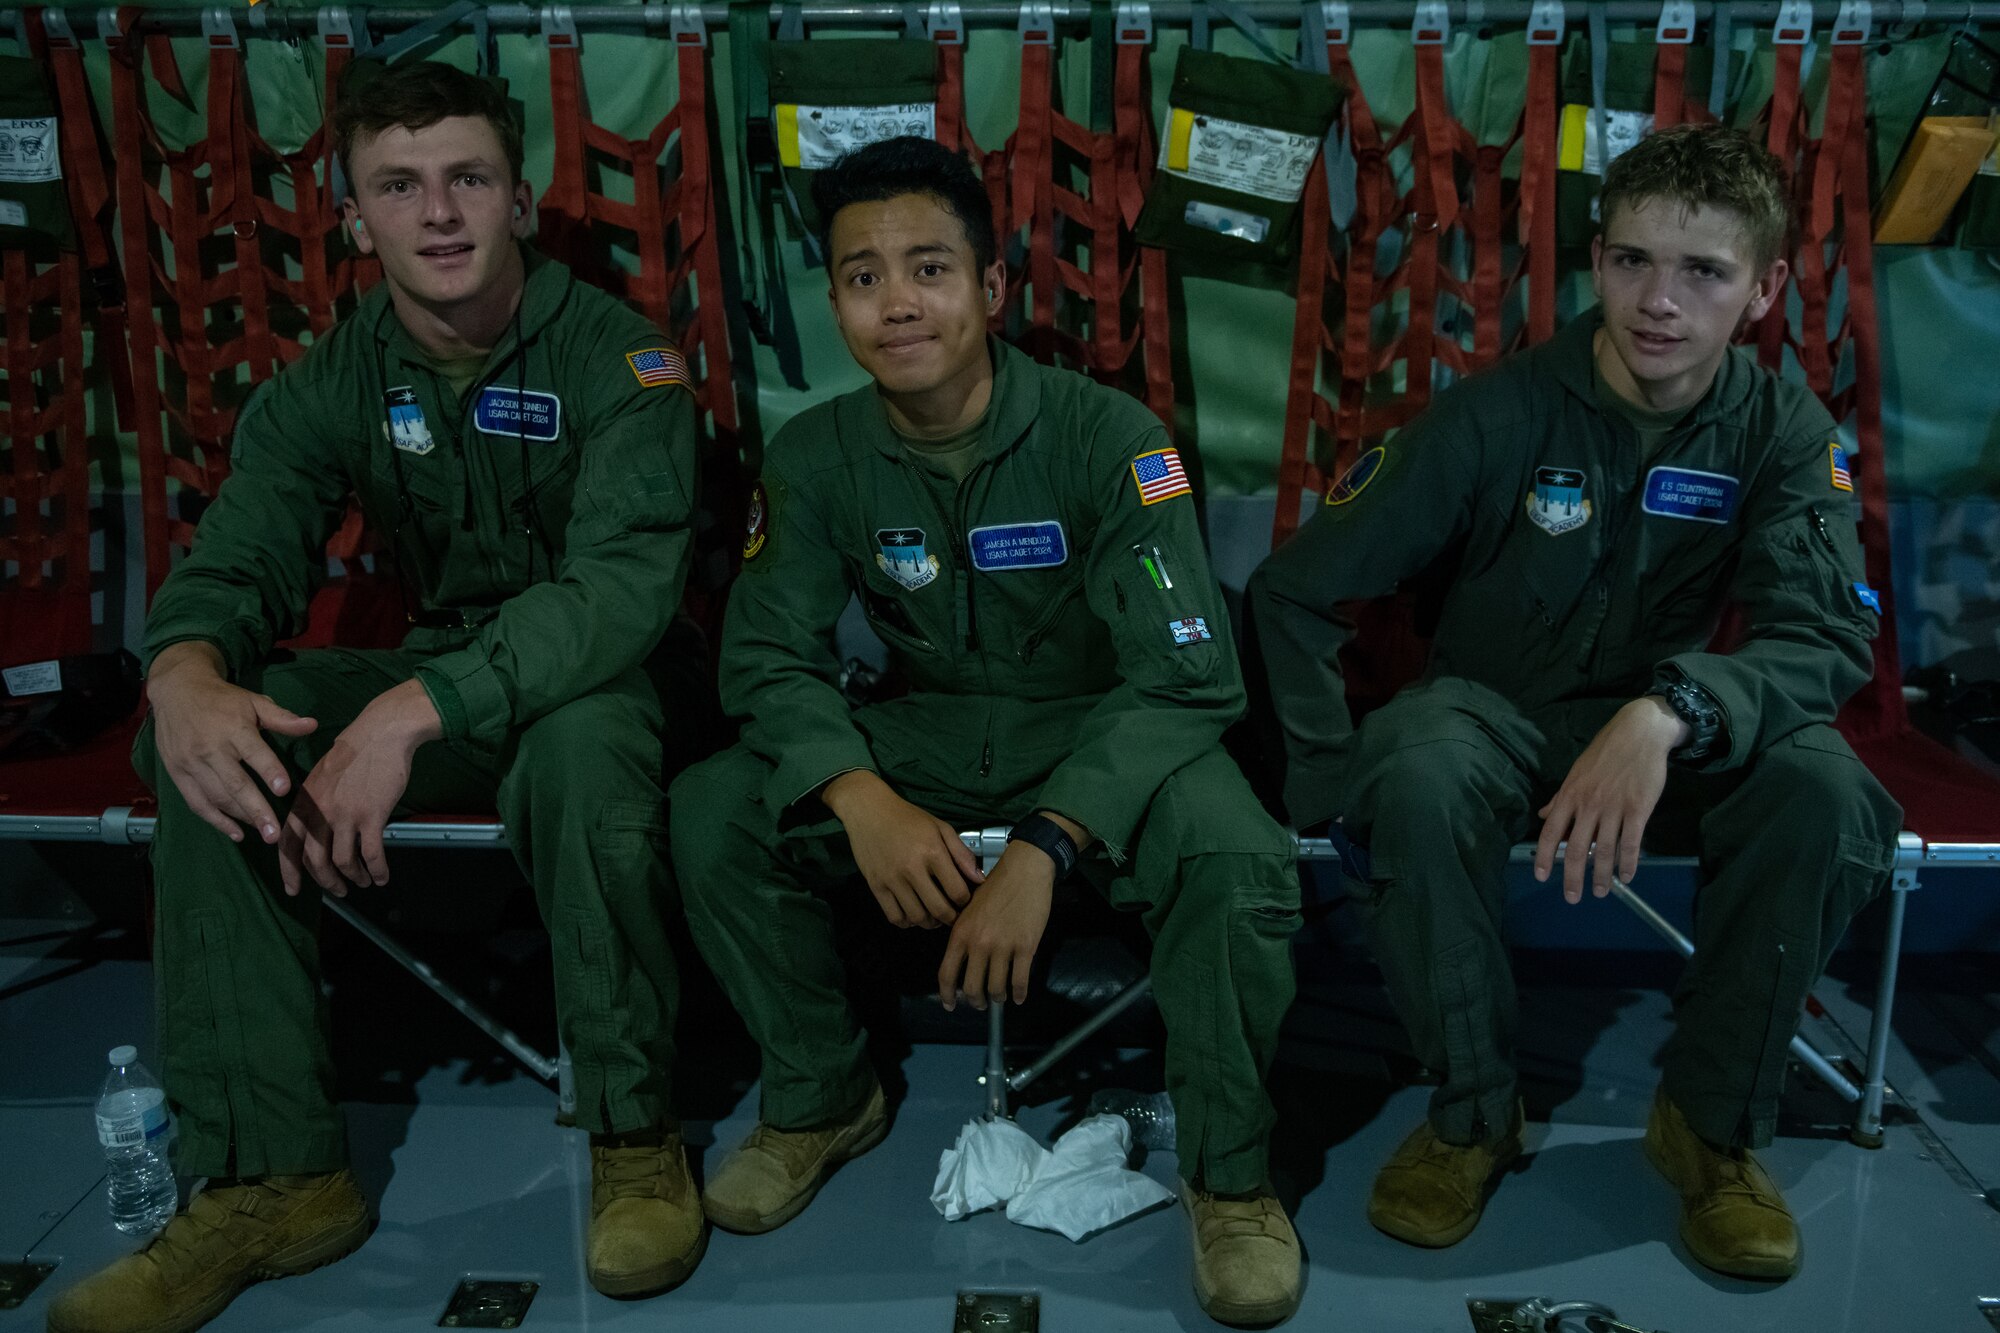 Three U.S. Air Force Academy cadets pose for a photo aboard a KC-135 Stratotanker assigned to the 185th Air Refueling Wing, Iowa Air National Guard, during an airborne refueling exercise near Rapid City, S.D., July 21, 2022.